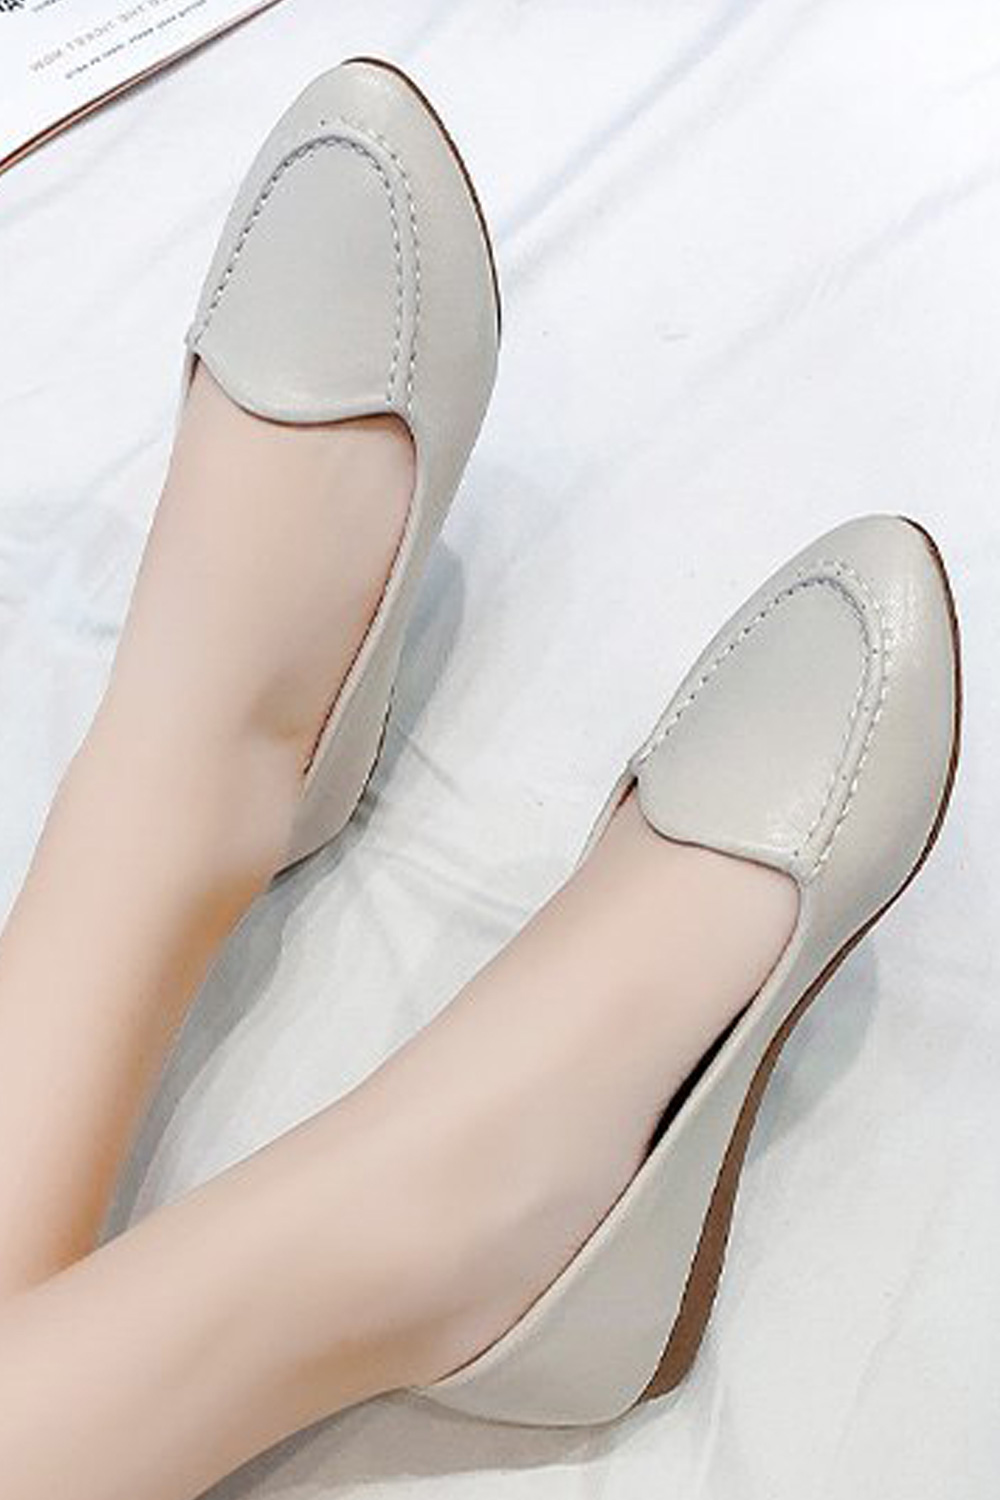 Women Flats Shoes Pointed Toe Shallow Solid Color Dress Flats Shoes 